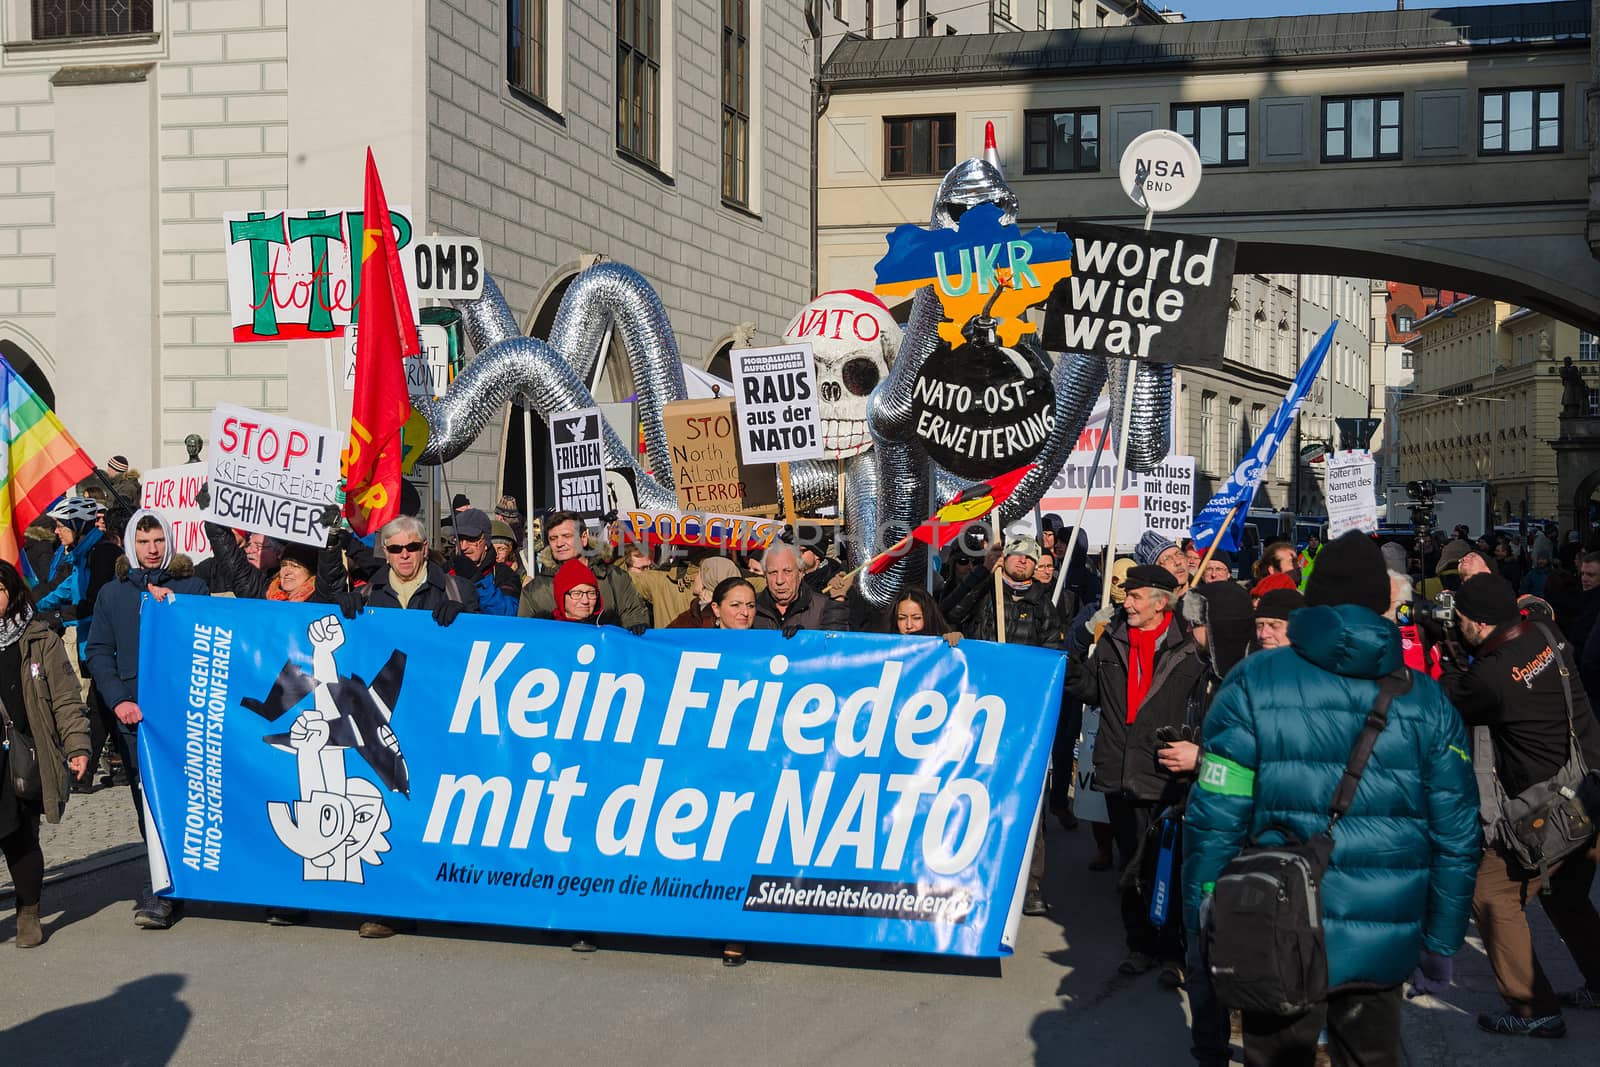 Munich, Germany - February 7, 2015: European anti-NATO peaceful protest demonstration. Texts on banners and placards says: "Stop North Atlantic Alliance eastward expansion", "No friendship with NATO".